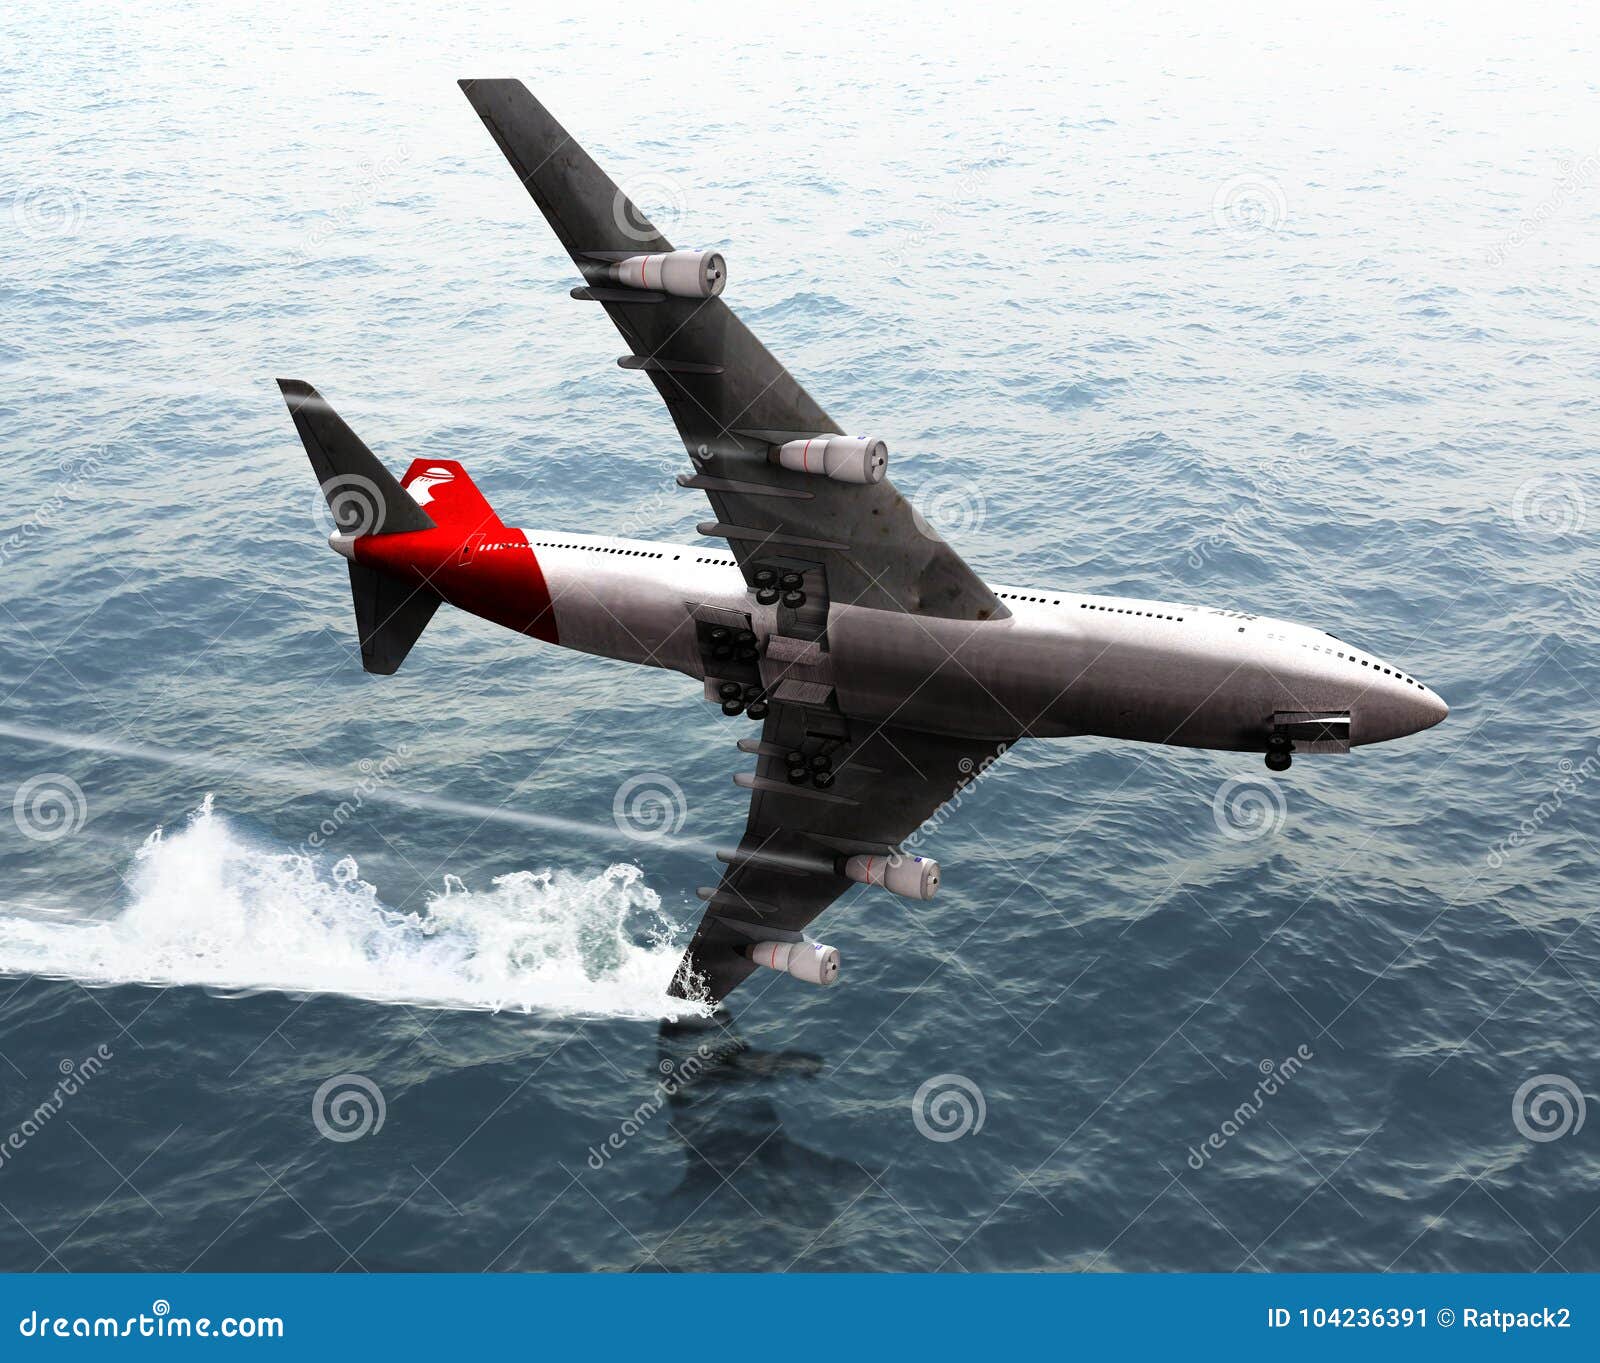 Airplane Wreck Stock Illustrations 107 Airplane Wreck Stock Illustrations Vectors Clipart Dreamstime - roblox plane crash into water